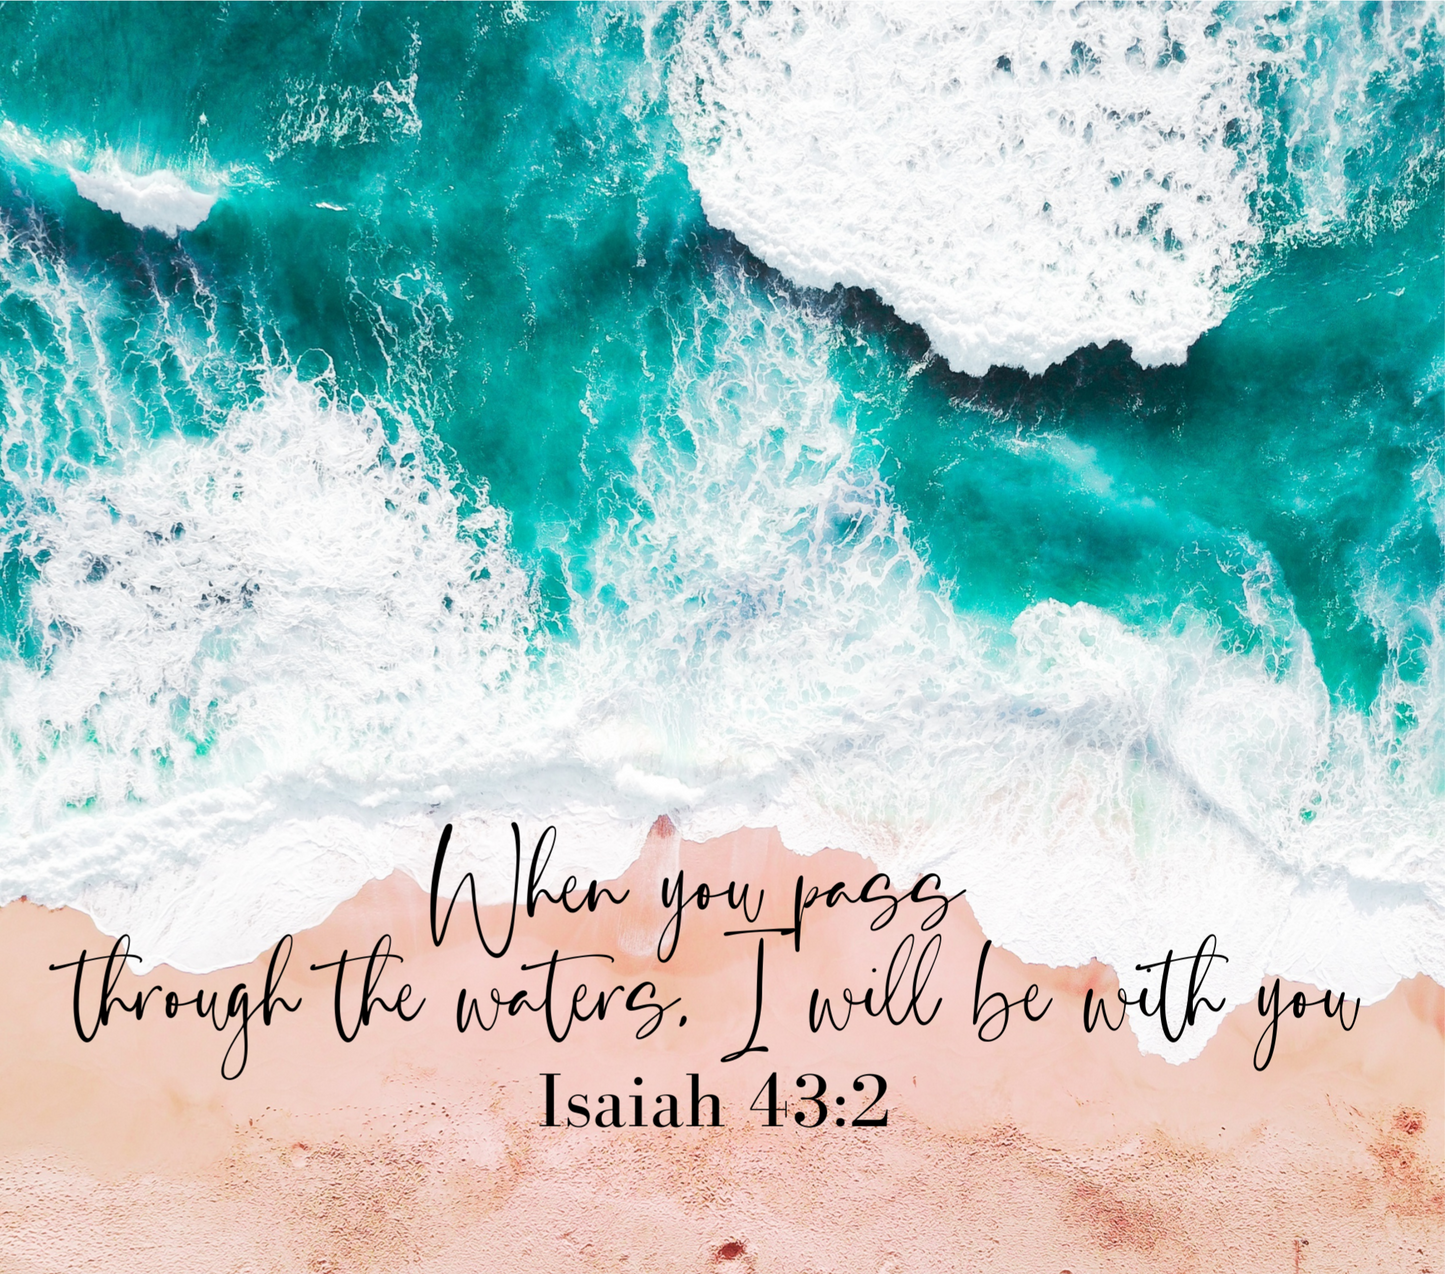 I Will Be With You Isaiah 43:2Beach Background - 20 Oz Sublimation Transfer